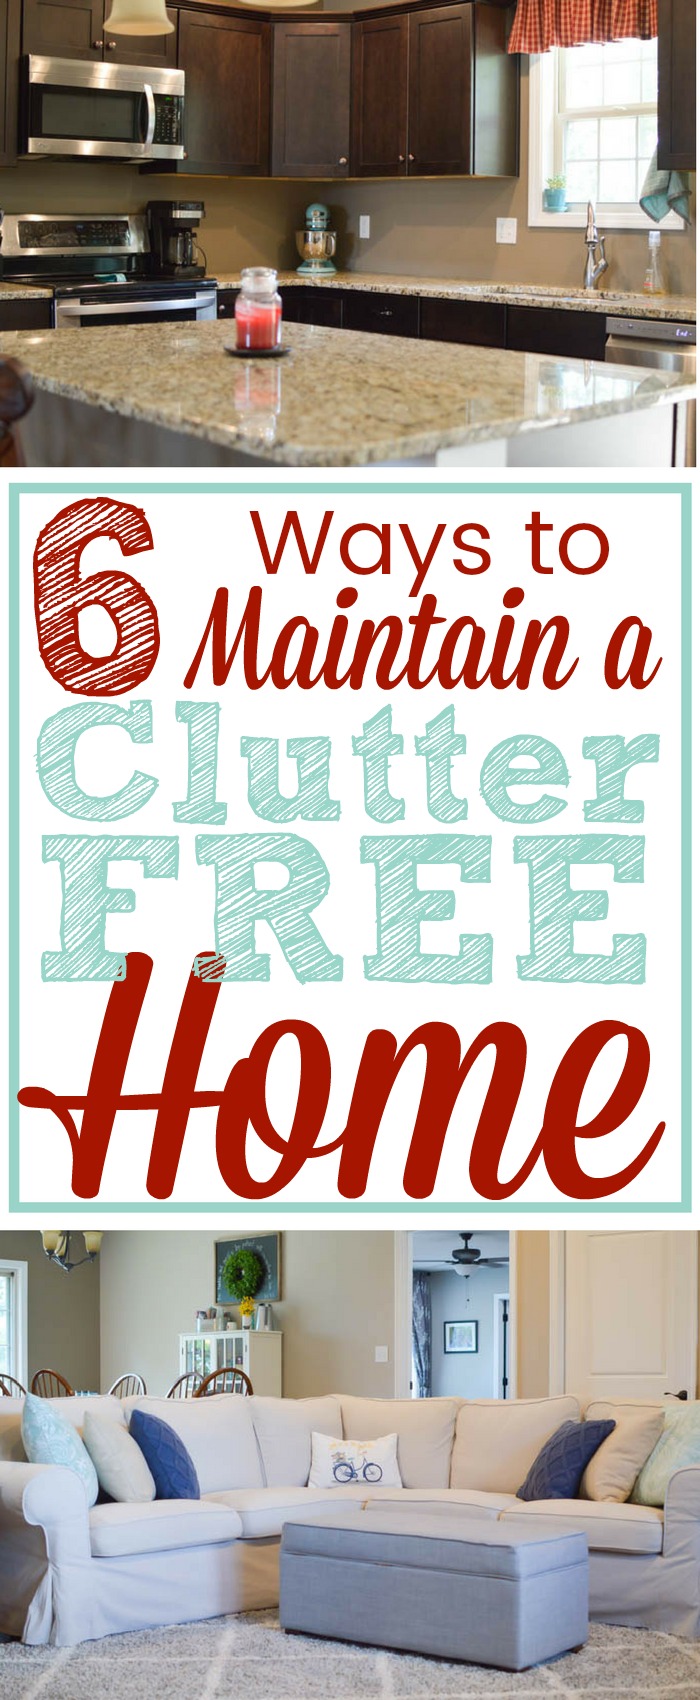 Are you struggling to maintain a clutter-free home? These 6 simple steps will help you keep your home clean and clutter-free for good!